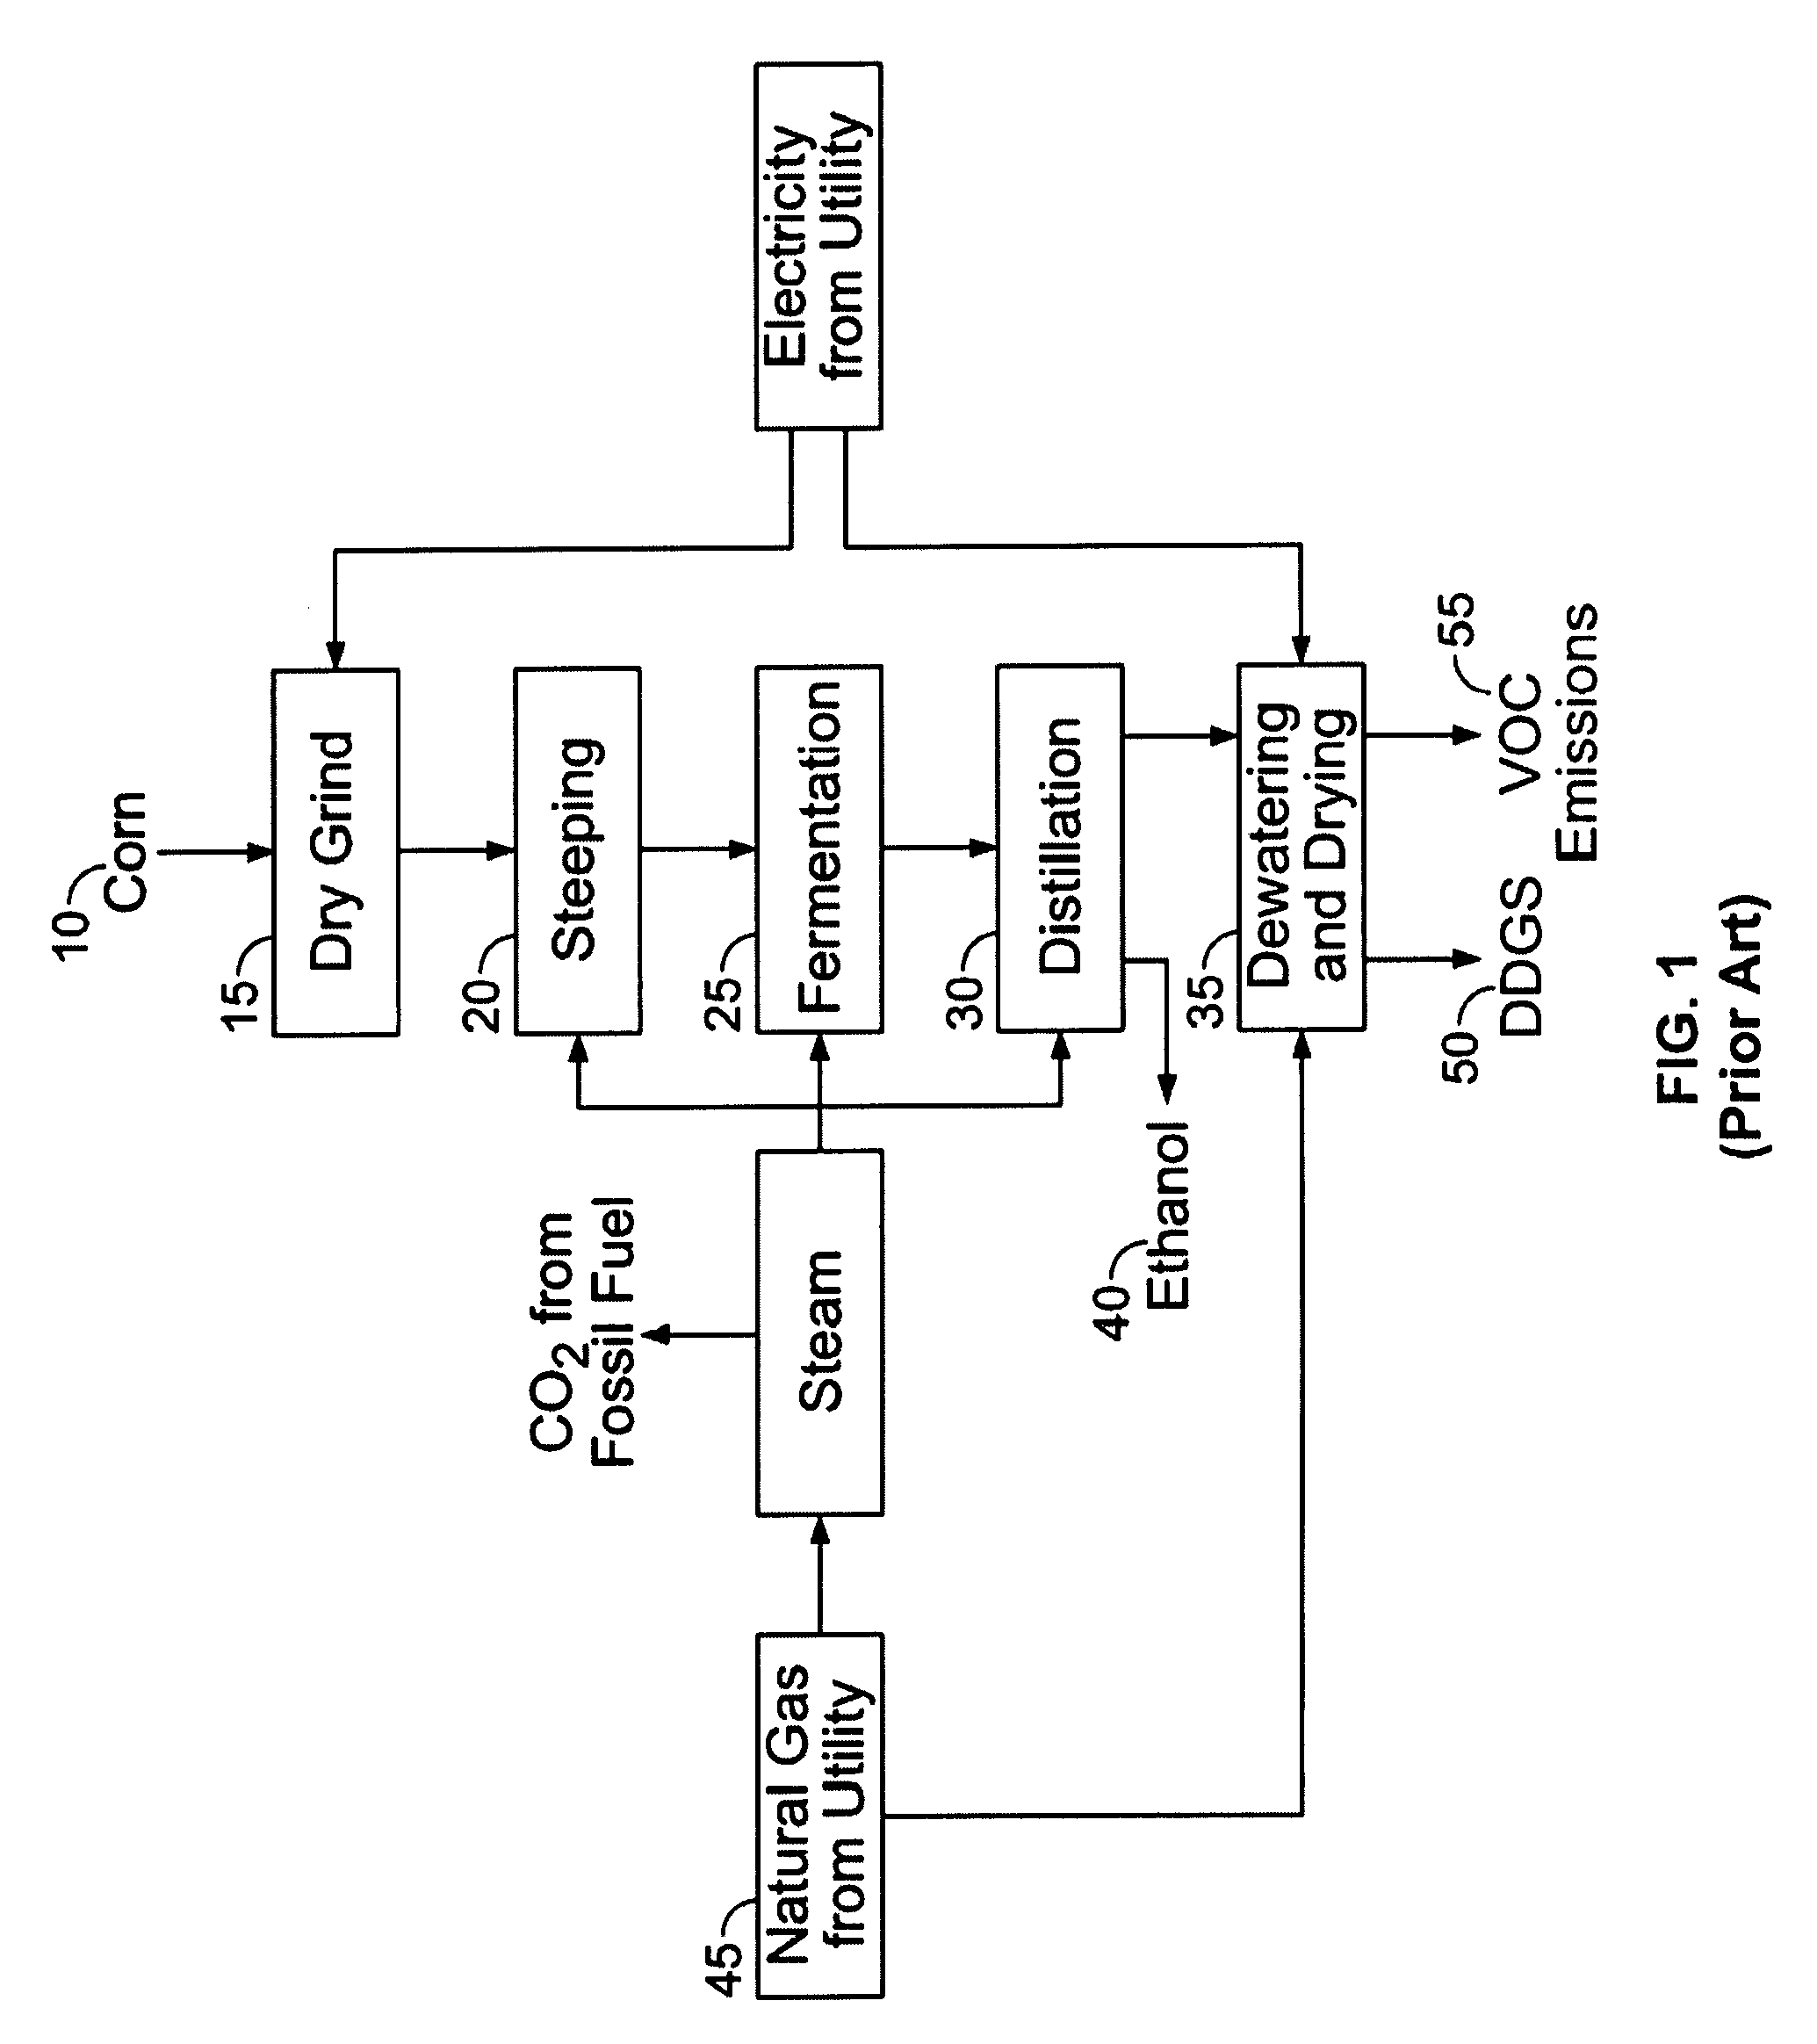 Process for producing ethanol and for energy recovery